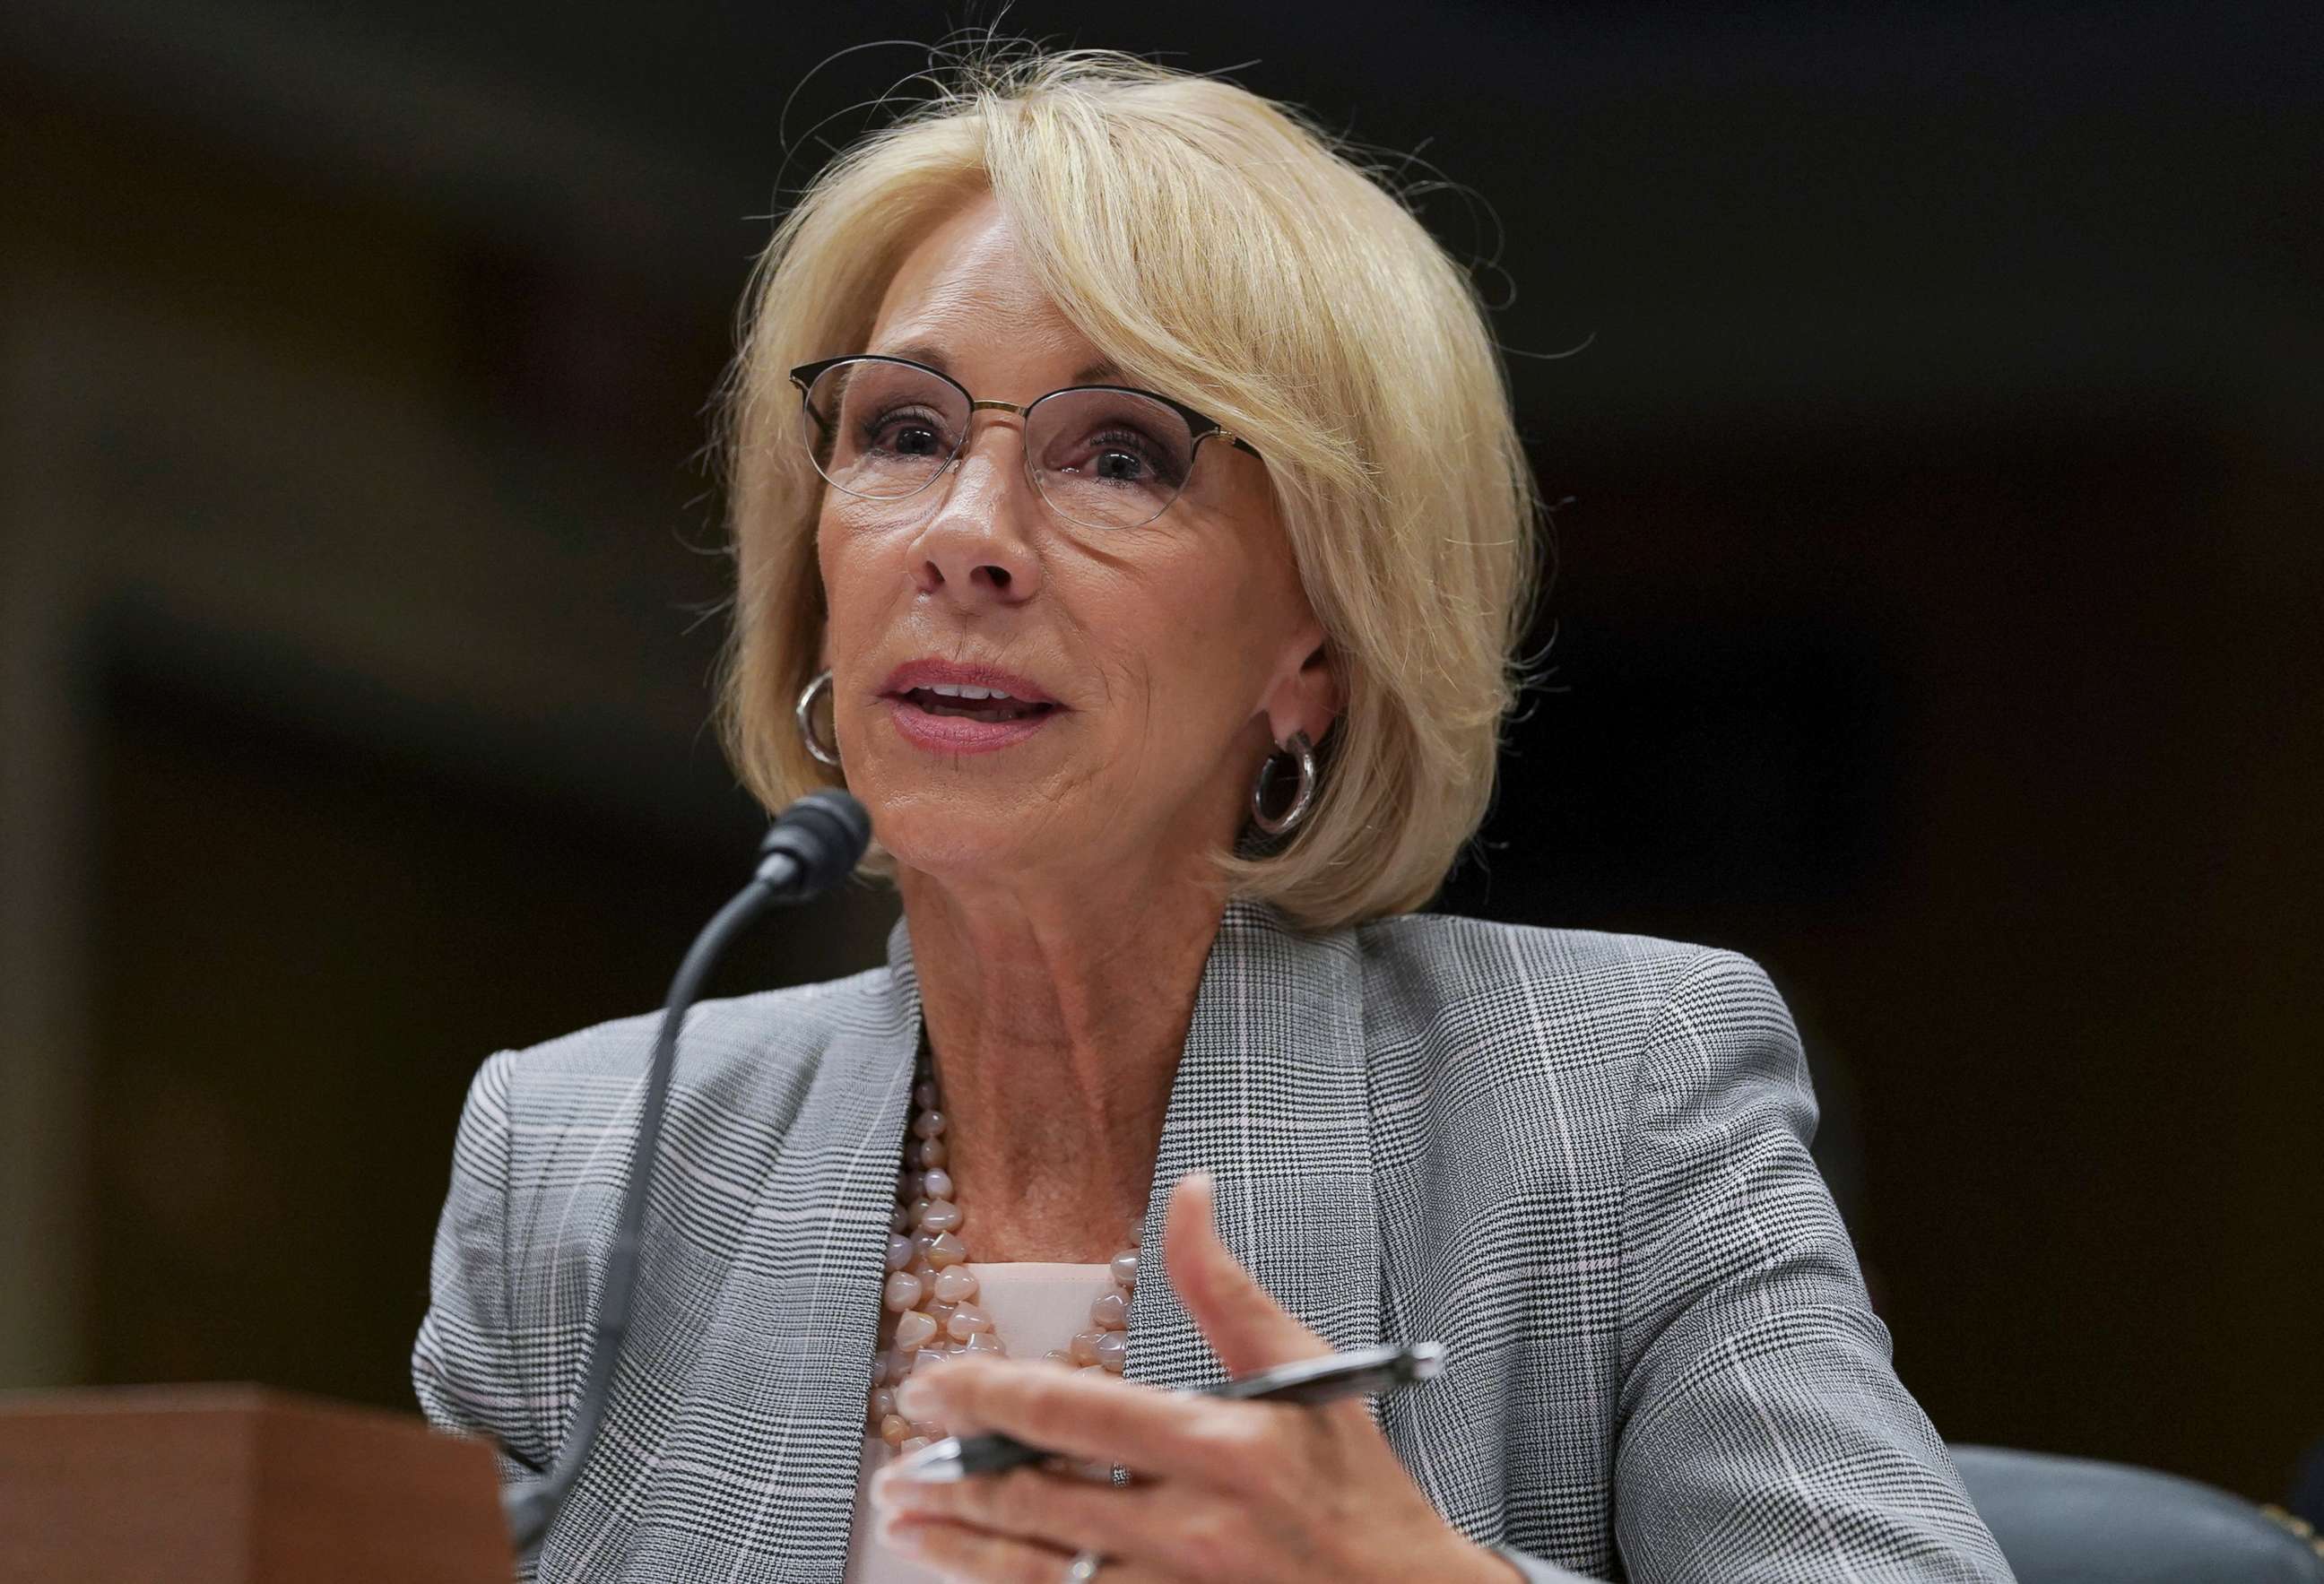 PHOTO: Education Secretary Betsy DeVos testifies during a Senate Subcommittee on Labor, Health and Human Services, Education, and Related Agencies Appropriations hearing in Washington, D.C, June 5, 2018.